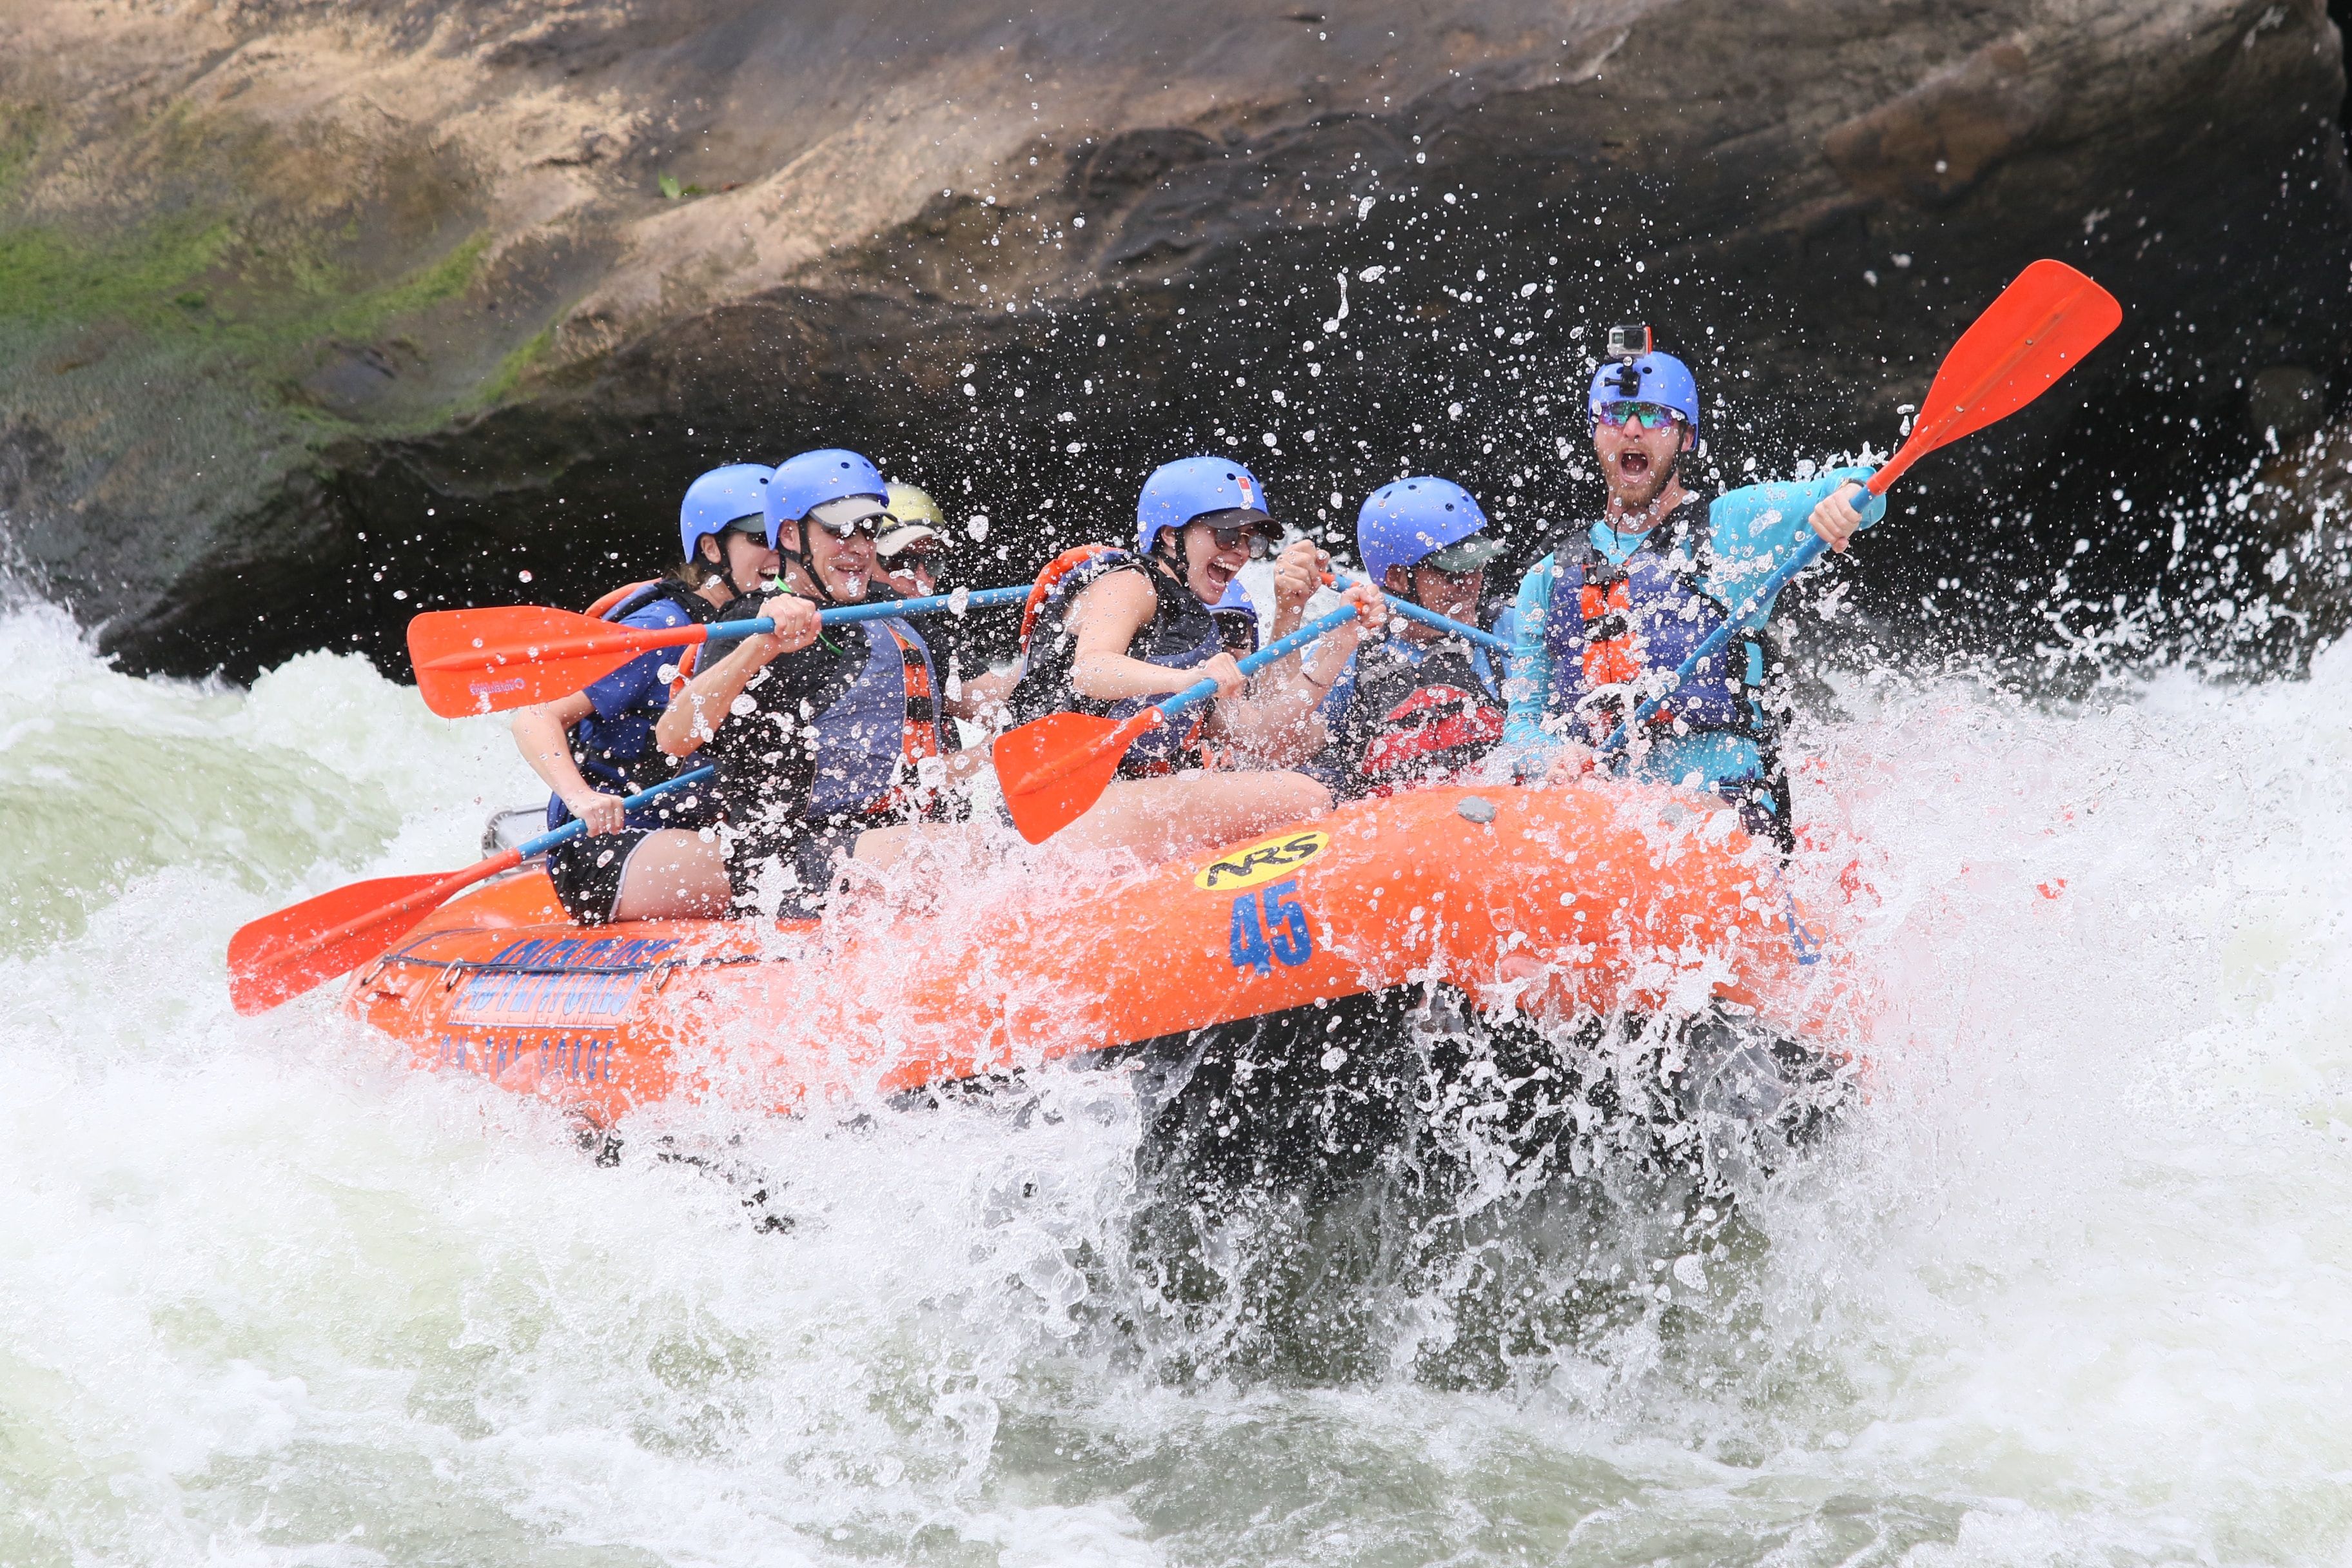 Rafters brace against a rapid on a Guided Whitewater Rafting Tour